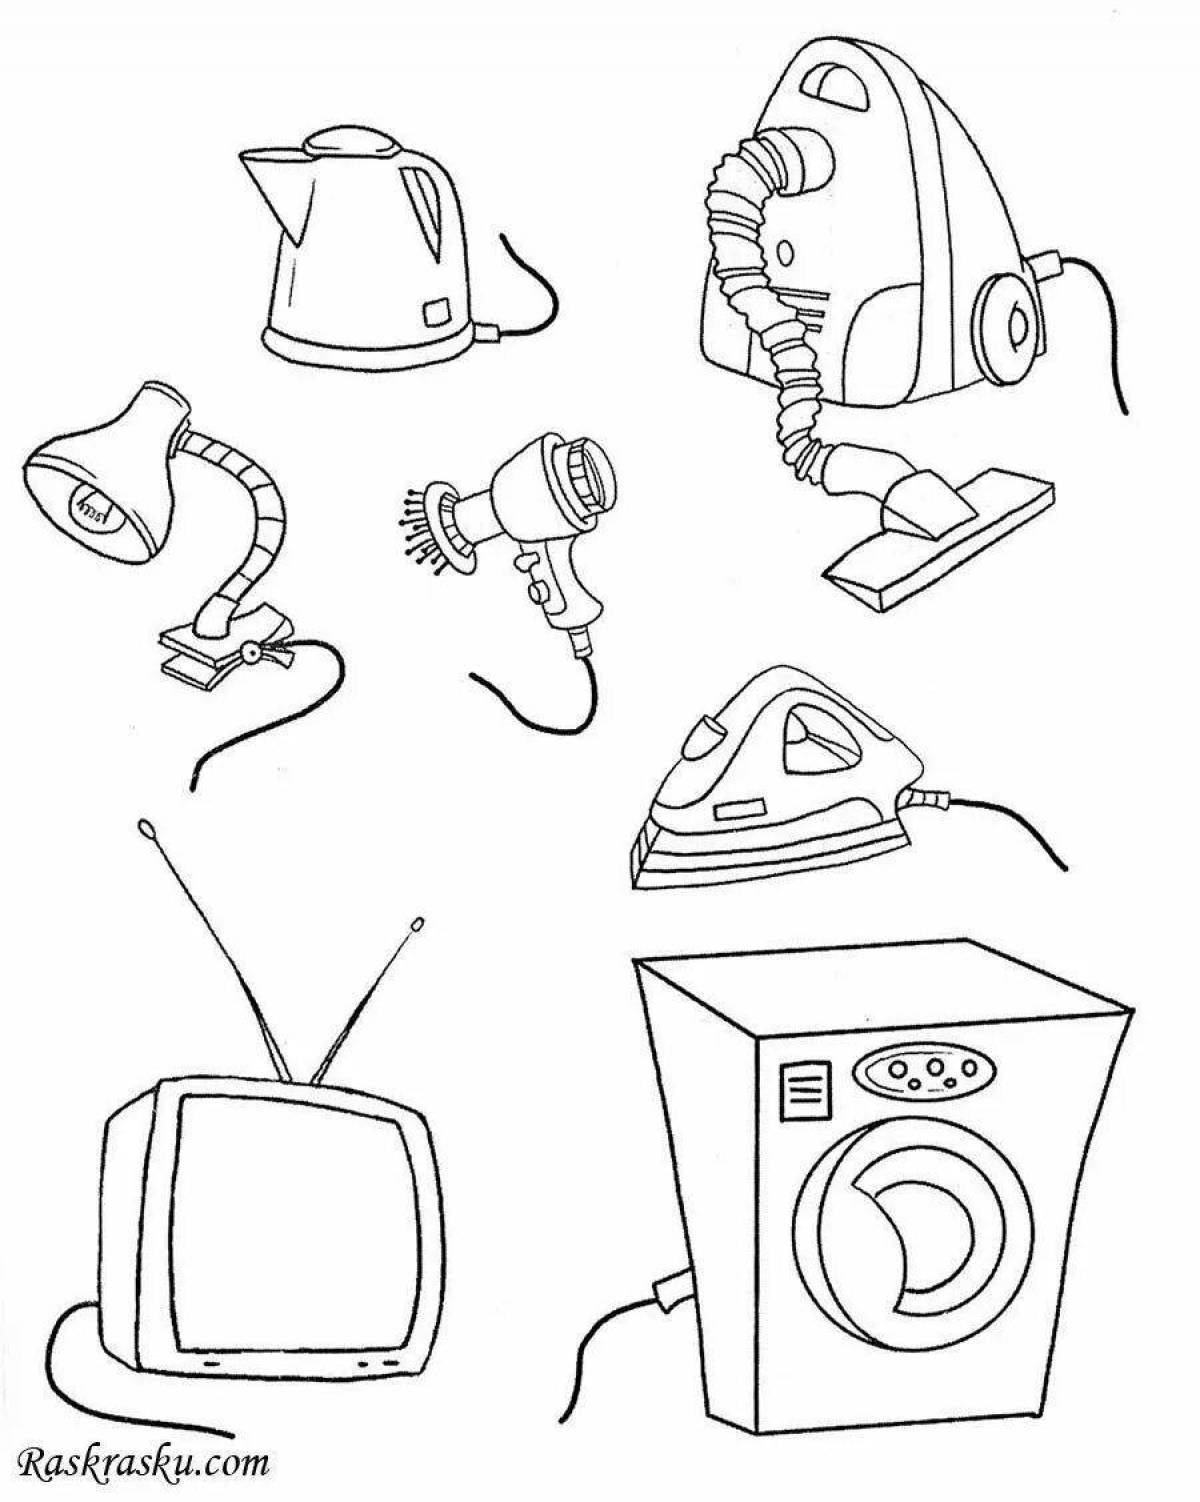 Household appliances for children 6 7 years old #25